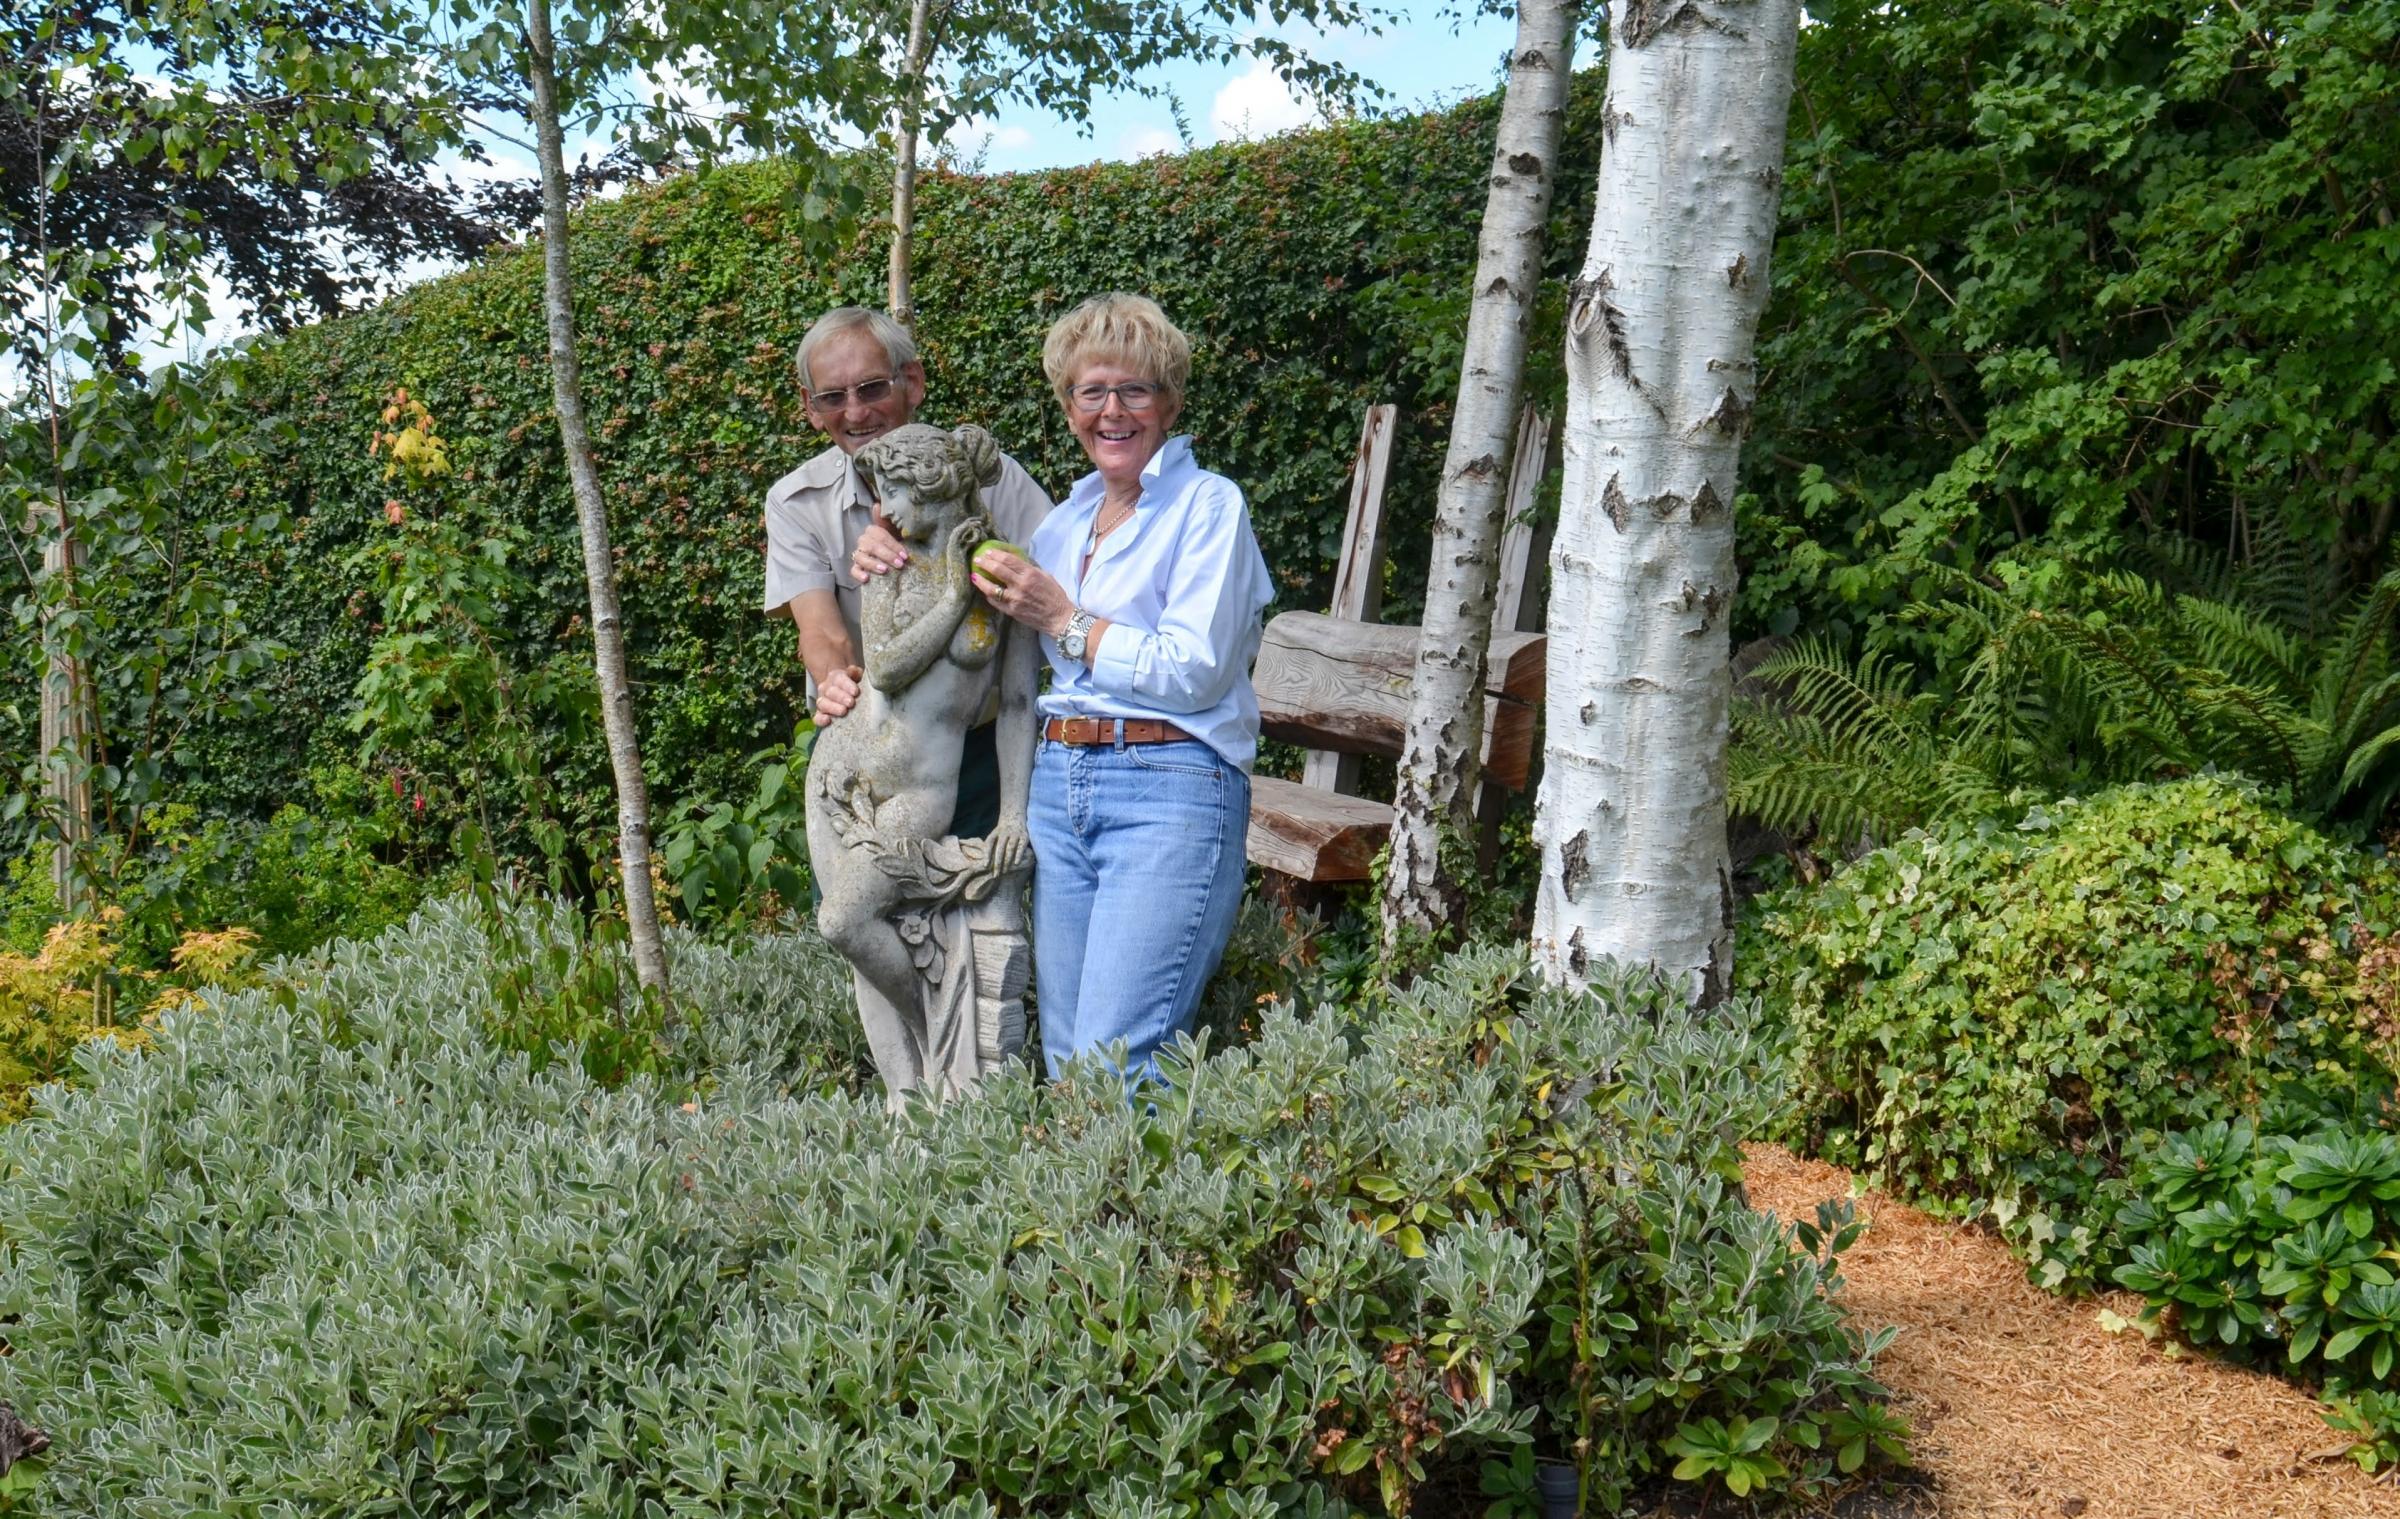 Pam and Alistair Thompson’s Pear Tree Cottage garden has been shortlisted in a national competition